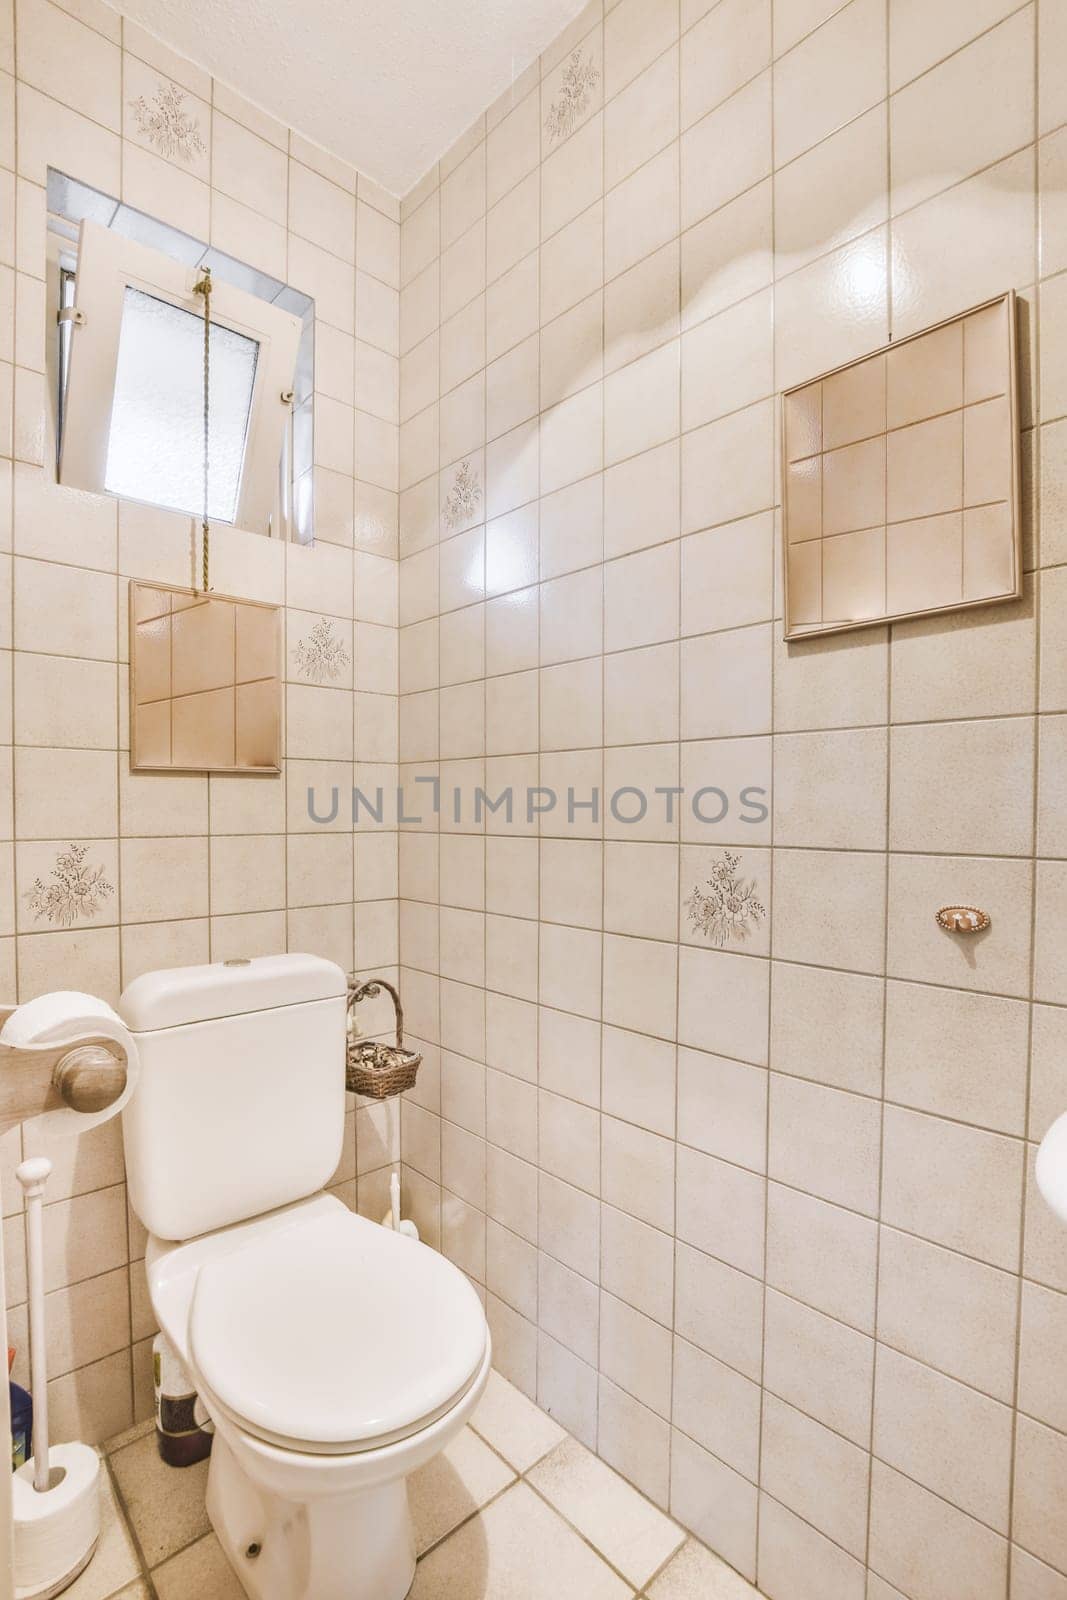 a white toilet in a bathroom with tile on the floor and wall behind it, there is a mirror above the toilet